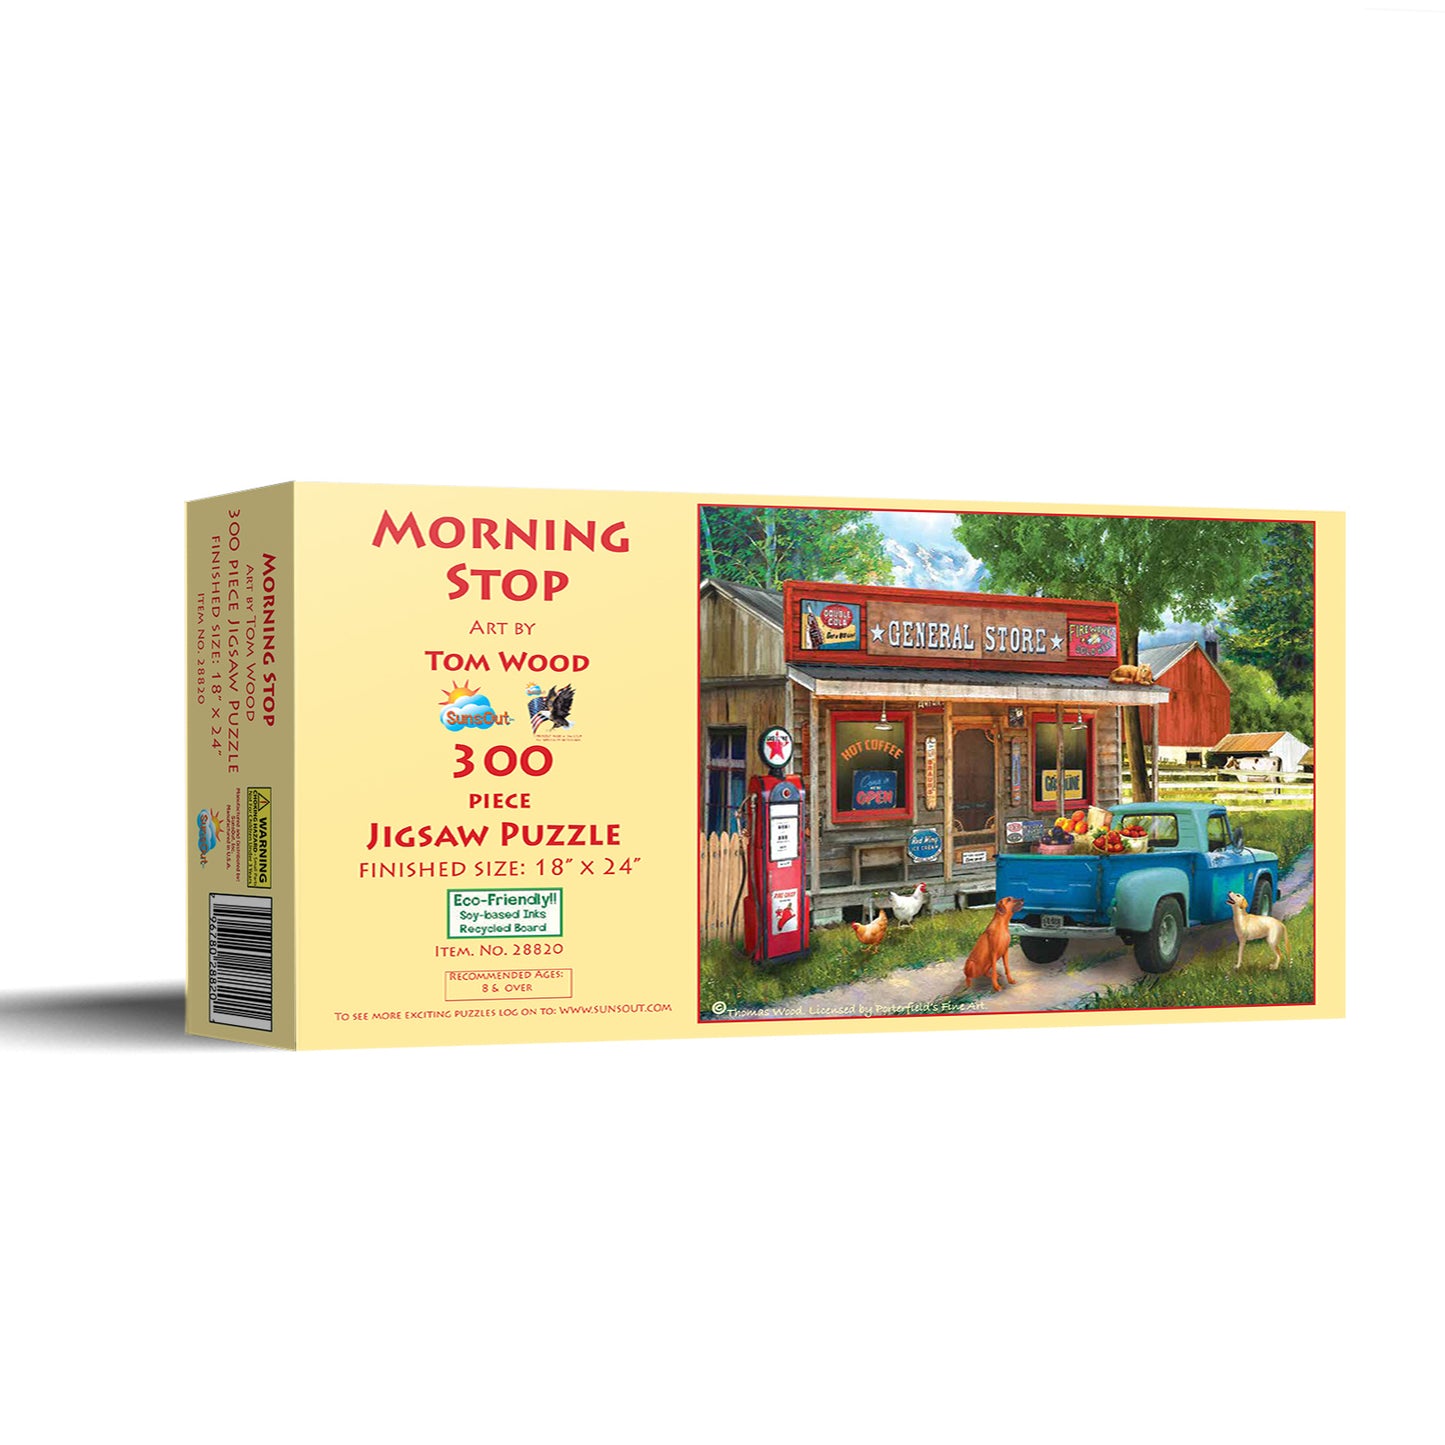 Morning Stop - 300 Piece Jigsaw Puzzle